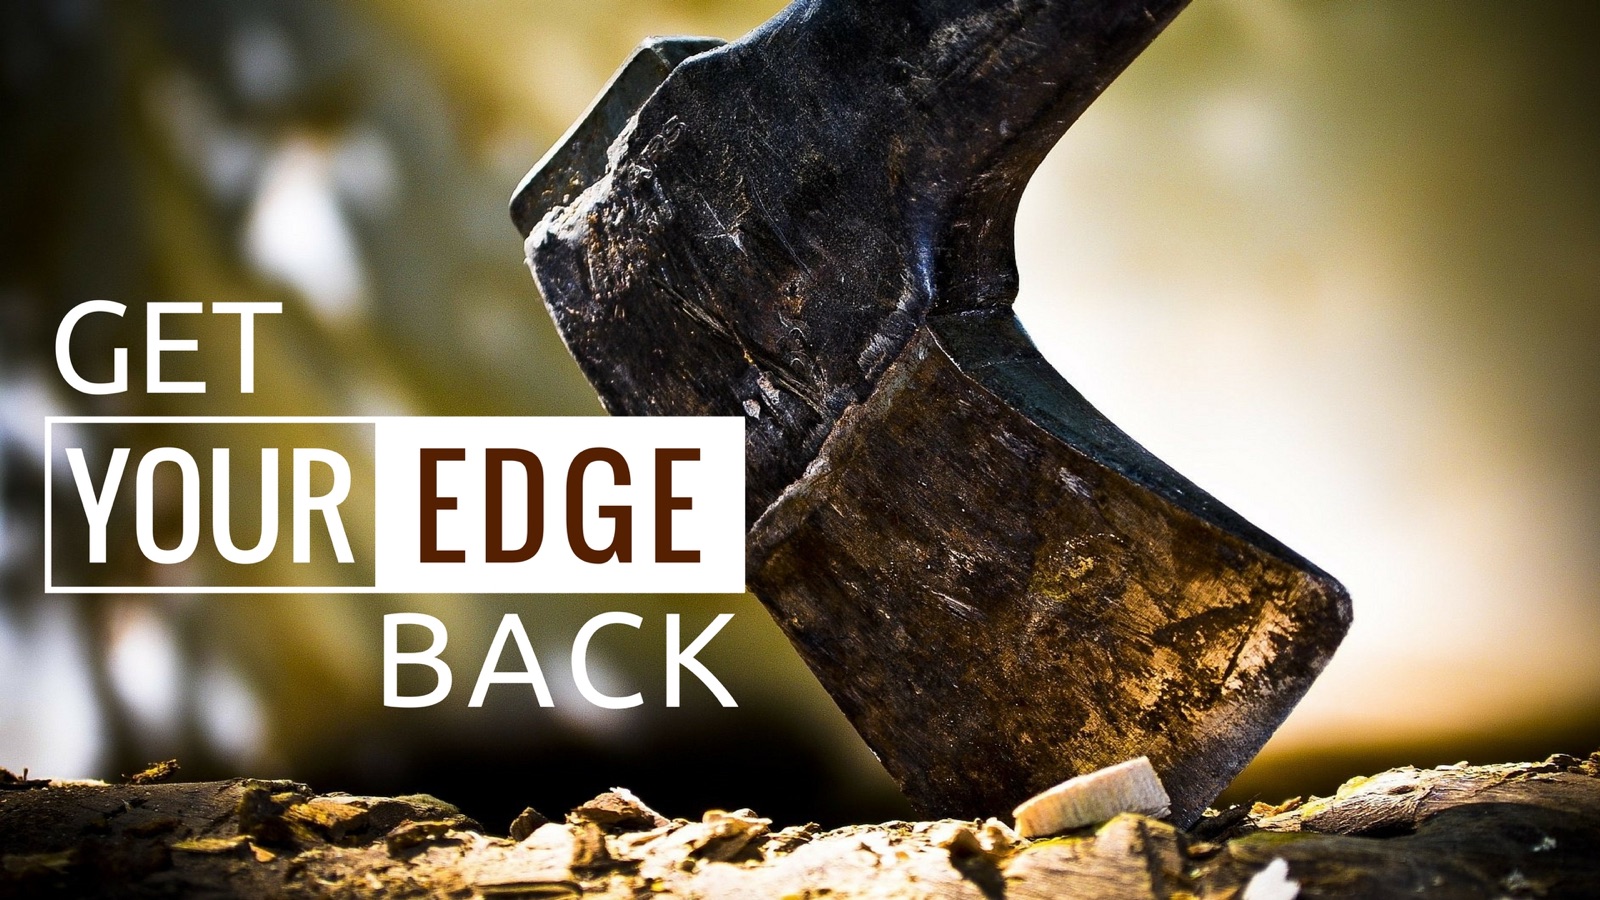 Get Your Edge Back - 08/13/17